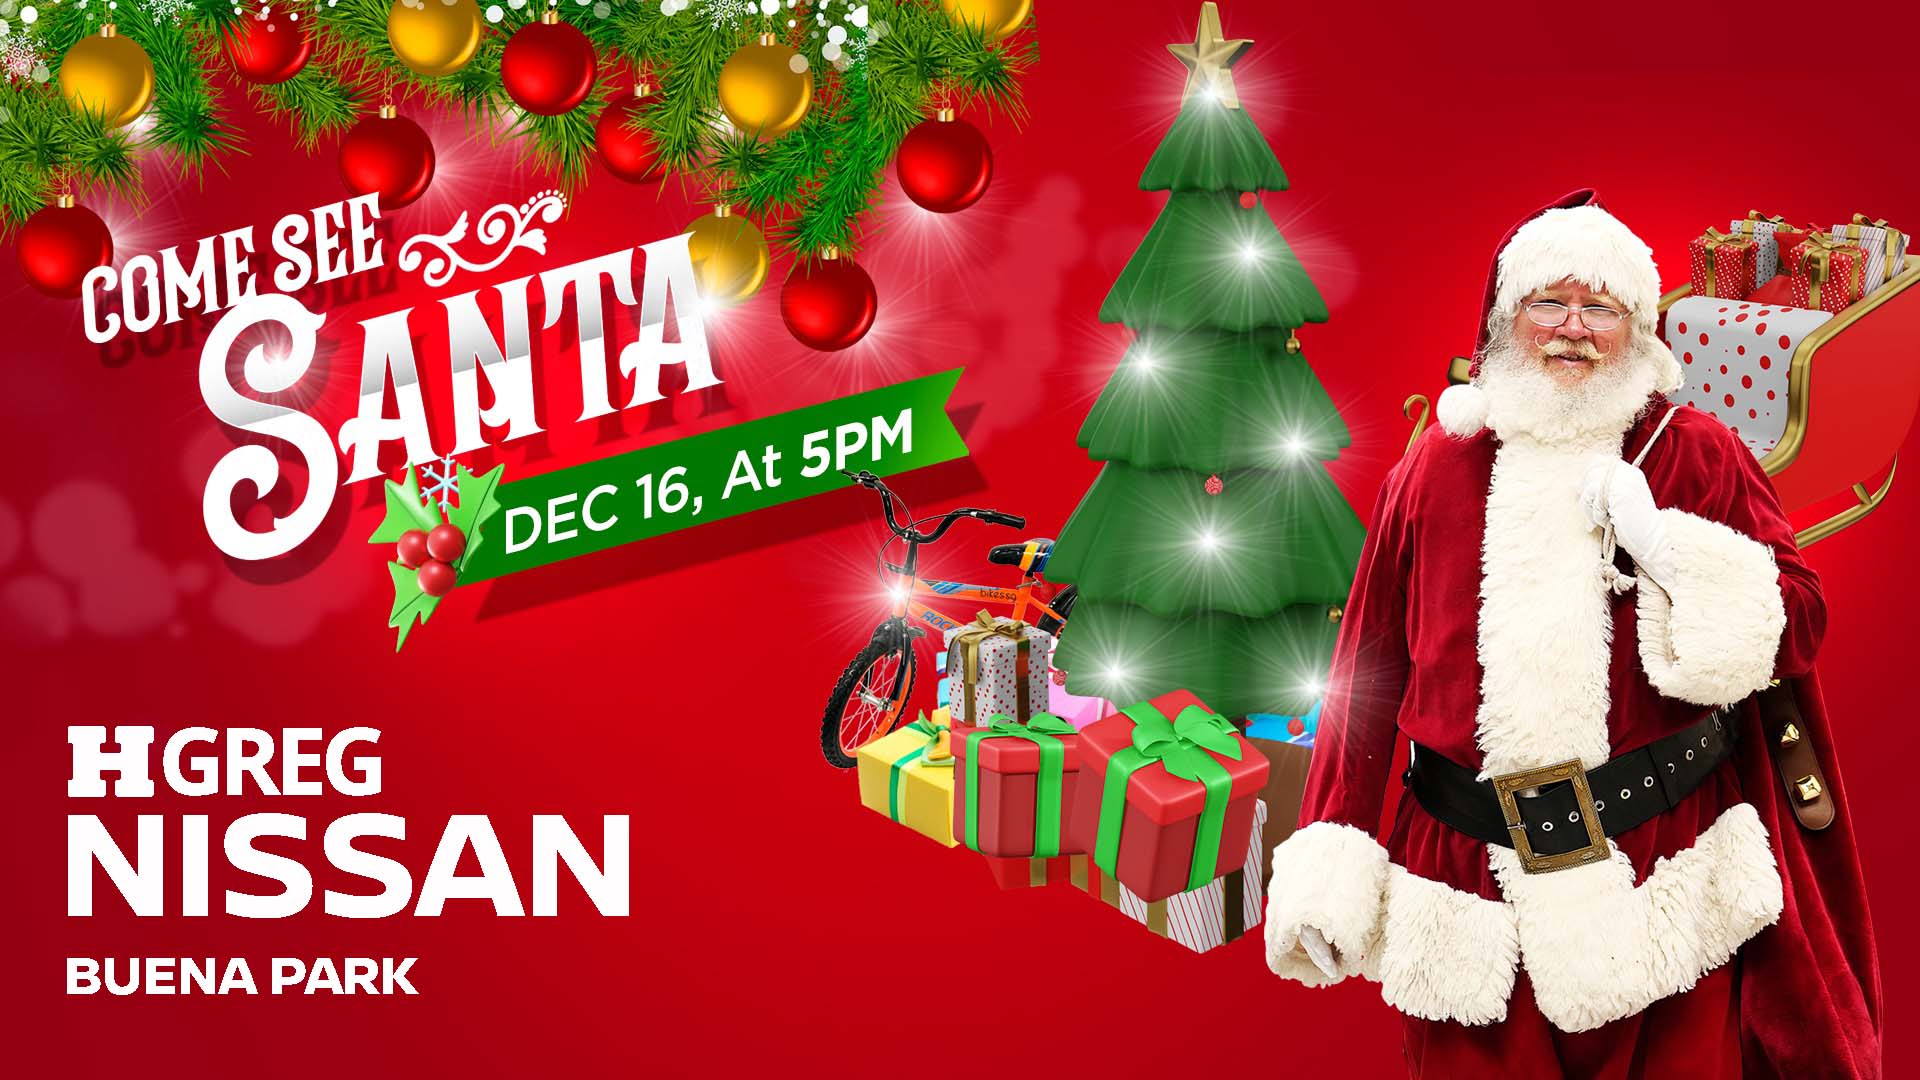 Get your family pictures taken with Santa Claus this holiday season at HGreg Nissan of Buena Park